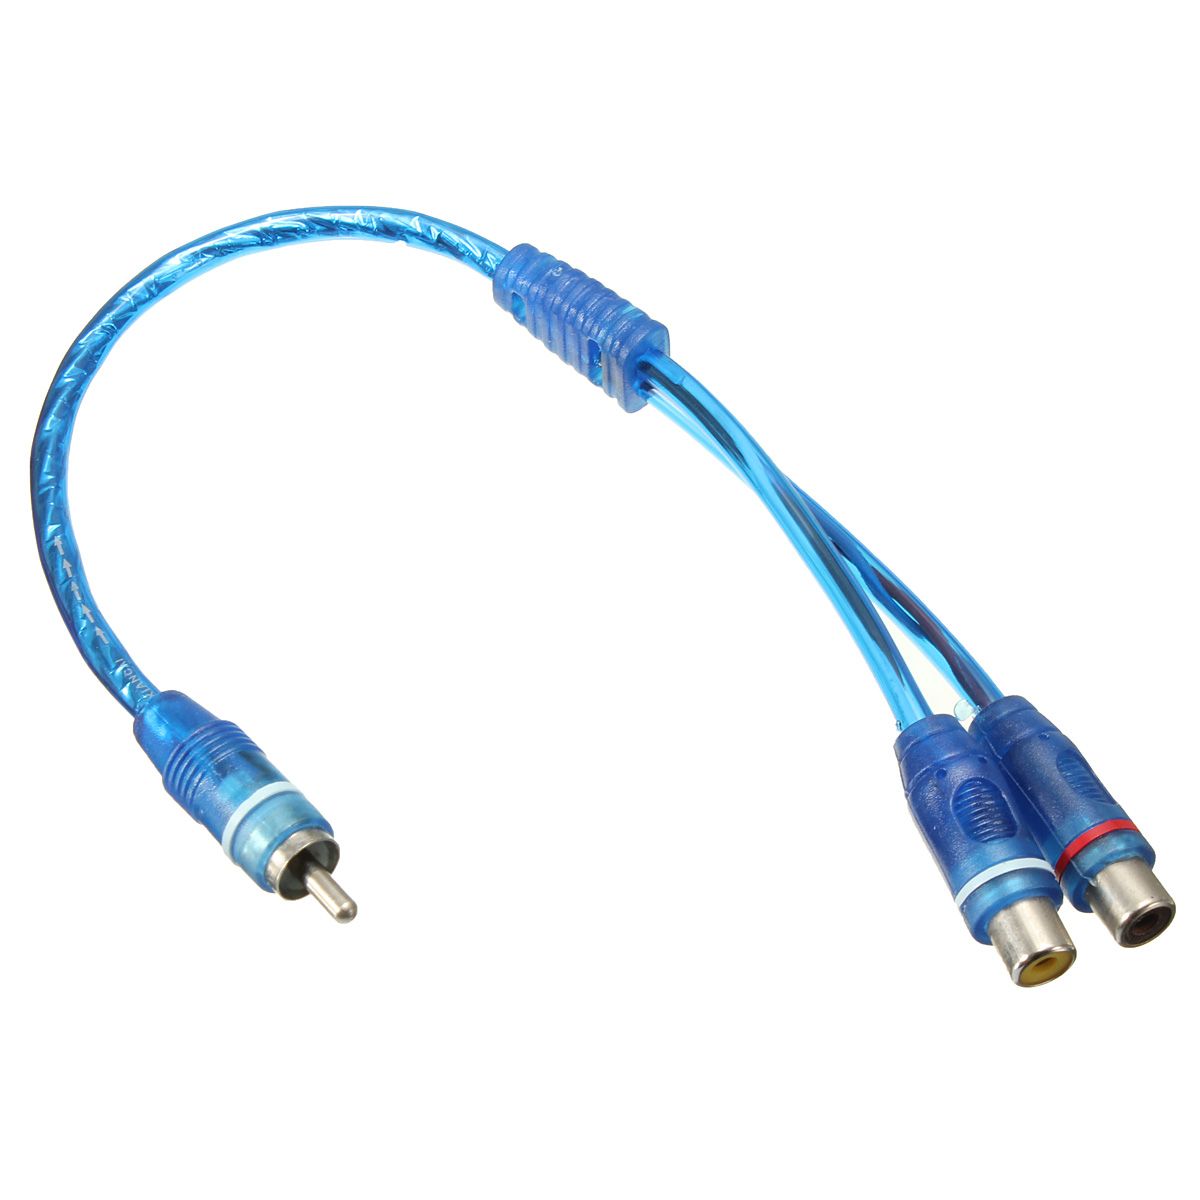 RCA-Y-Splitter-Lead-Adapter-Cable-Male-To-Female-Connector-Audio-Adapter-1535056